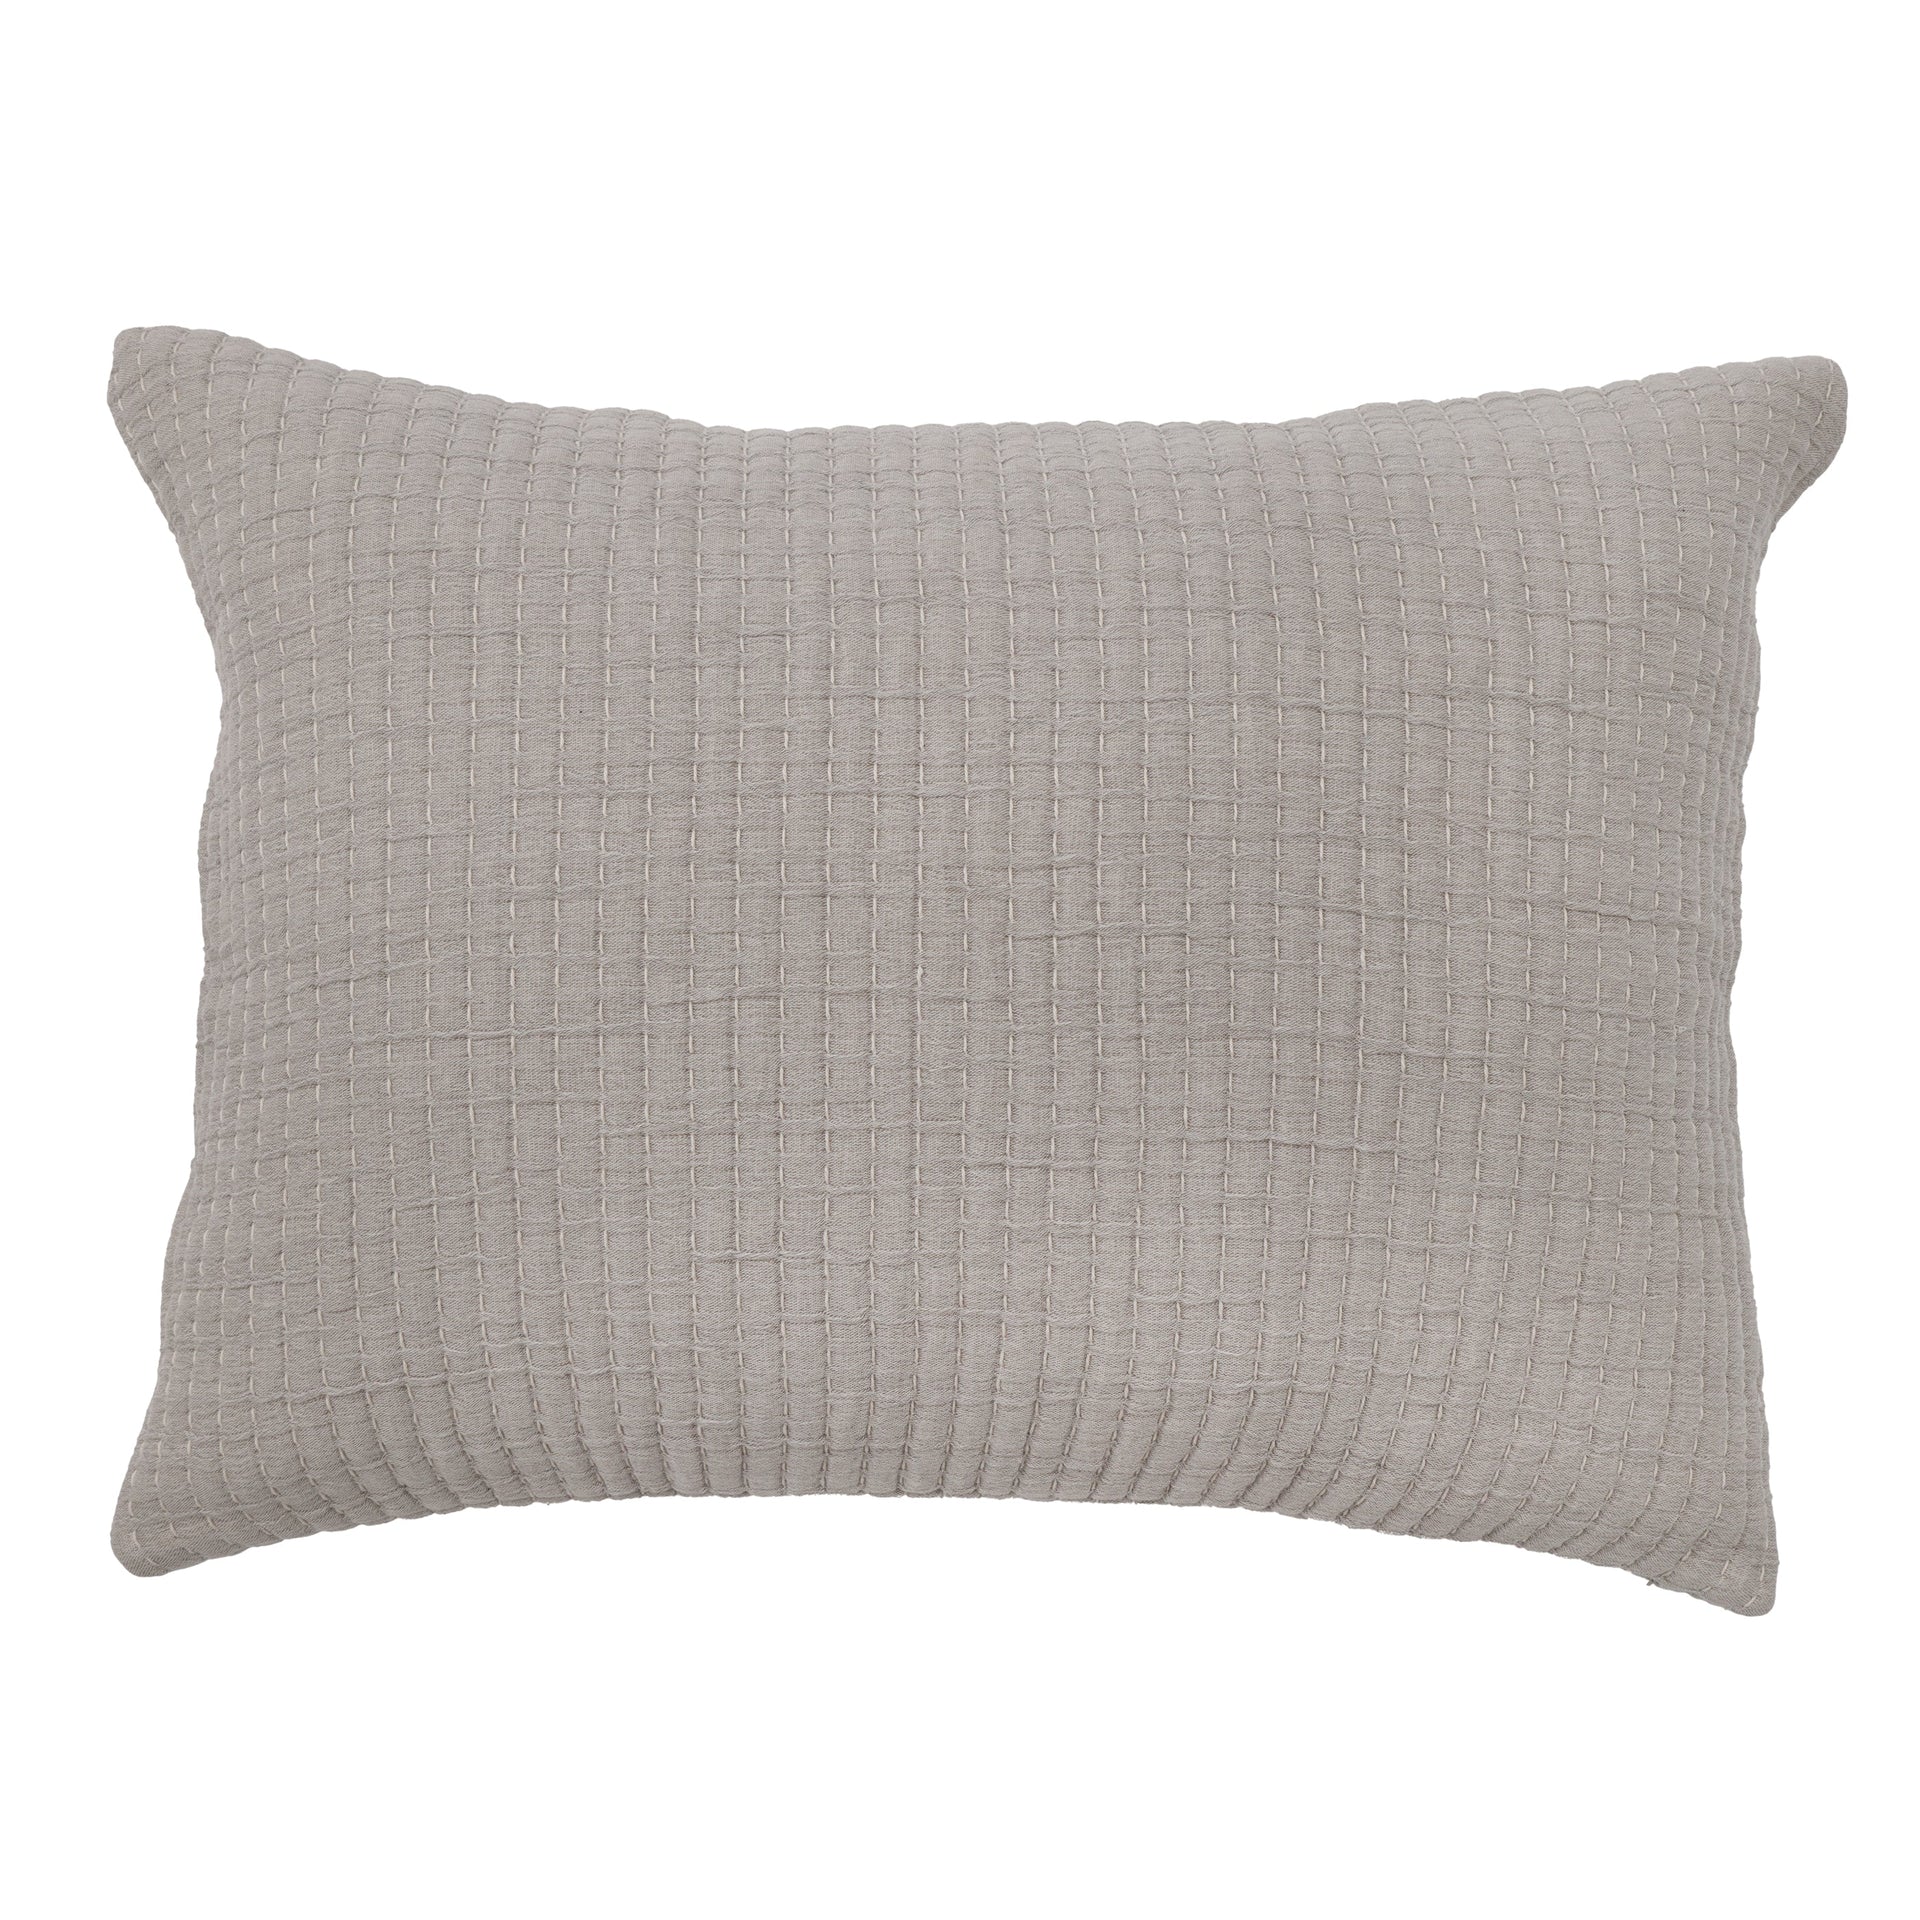 Vancouver Grey Big Pillow by Pom Pom at Home